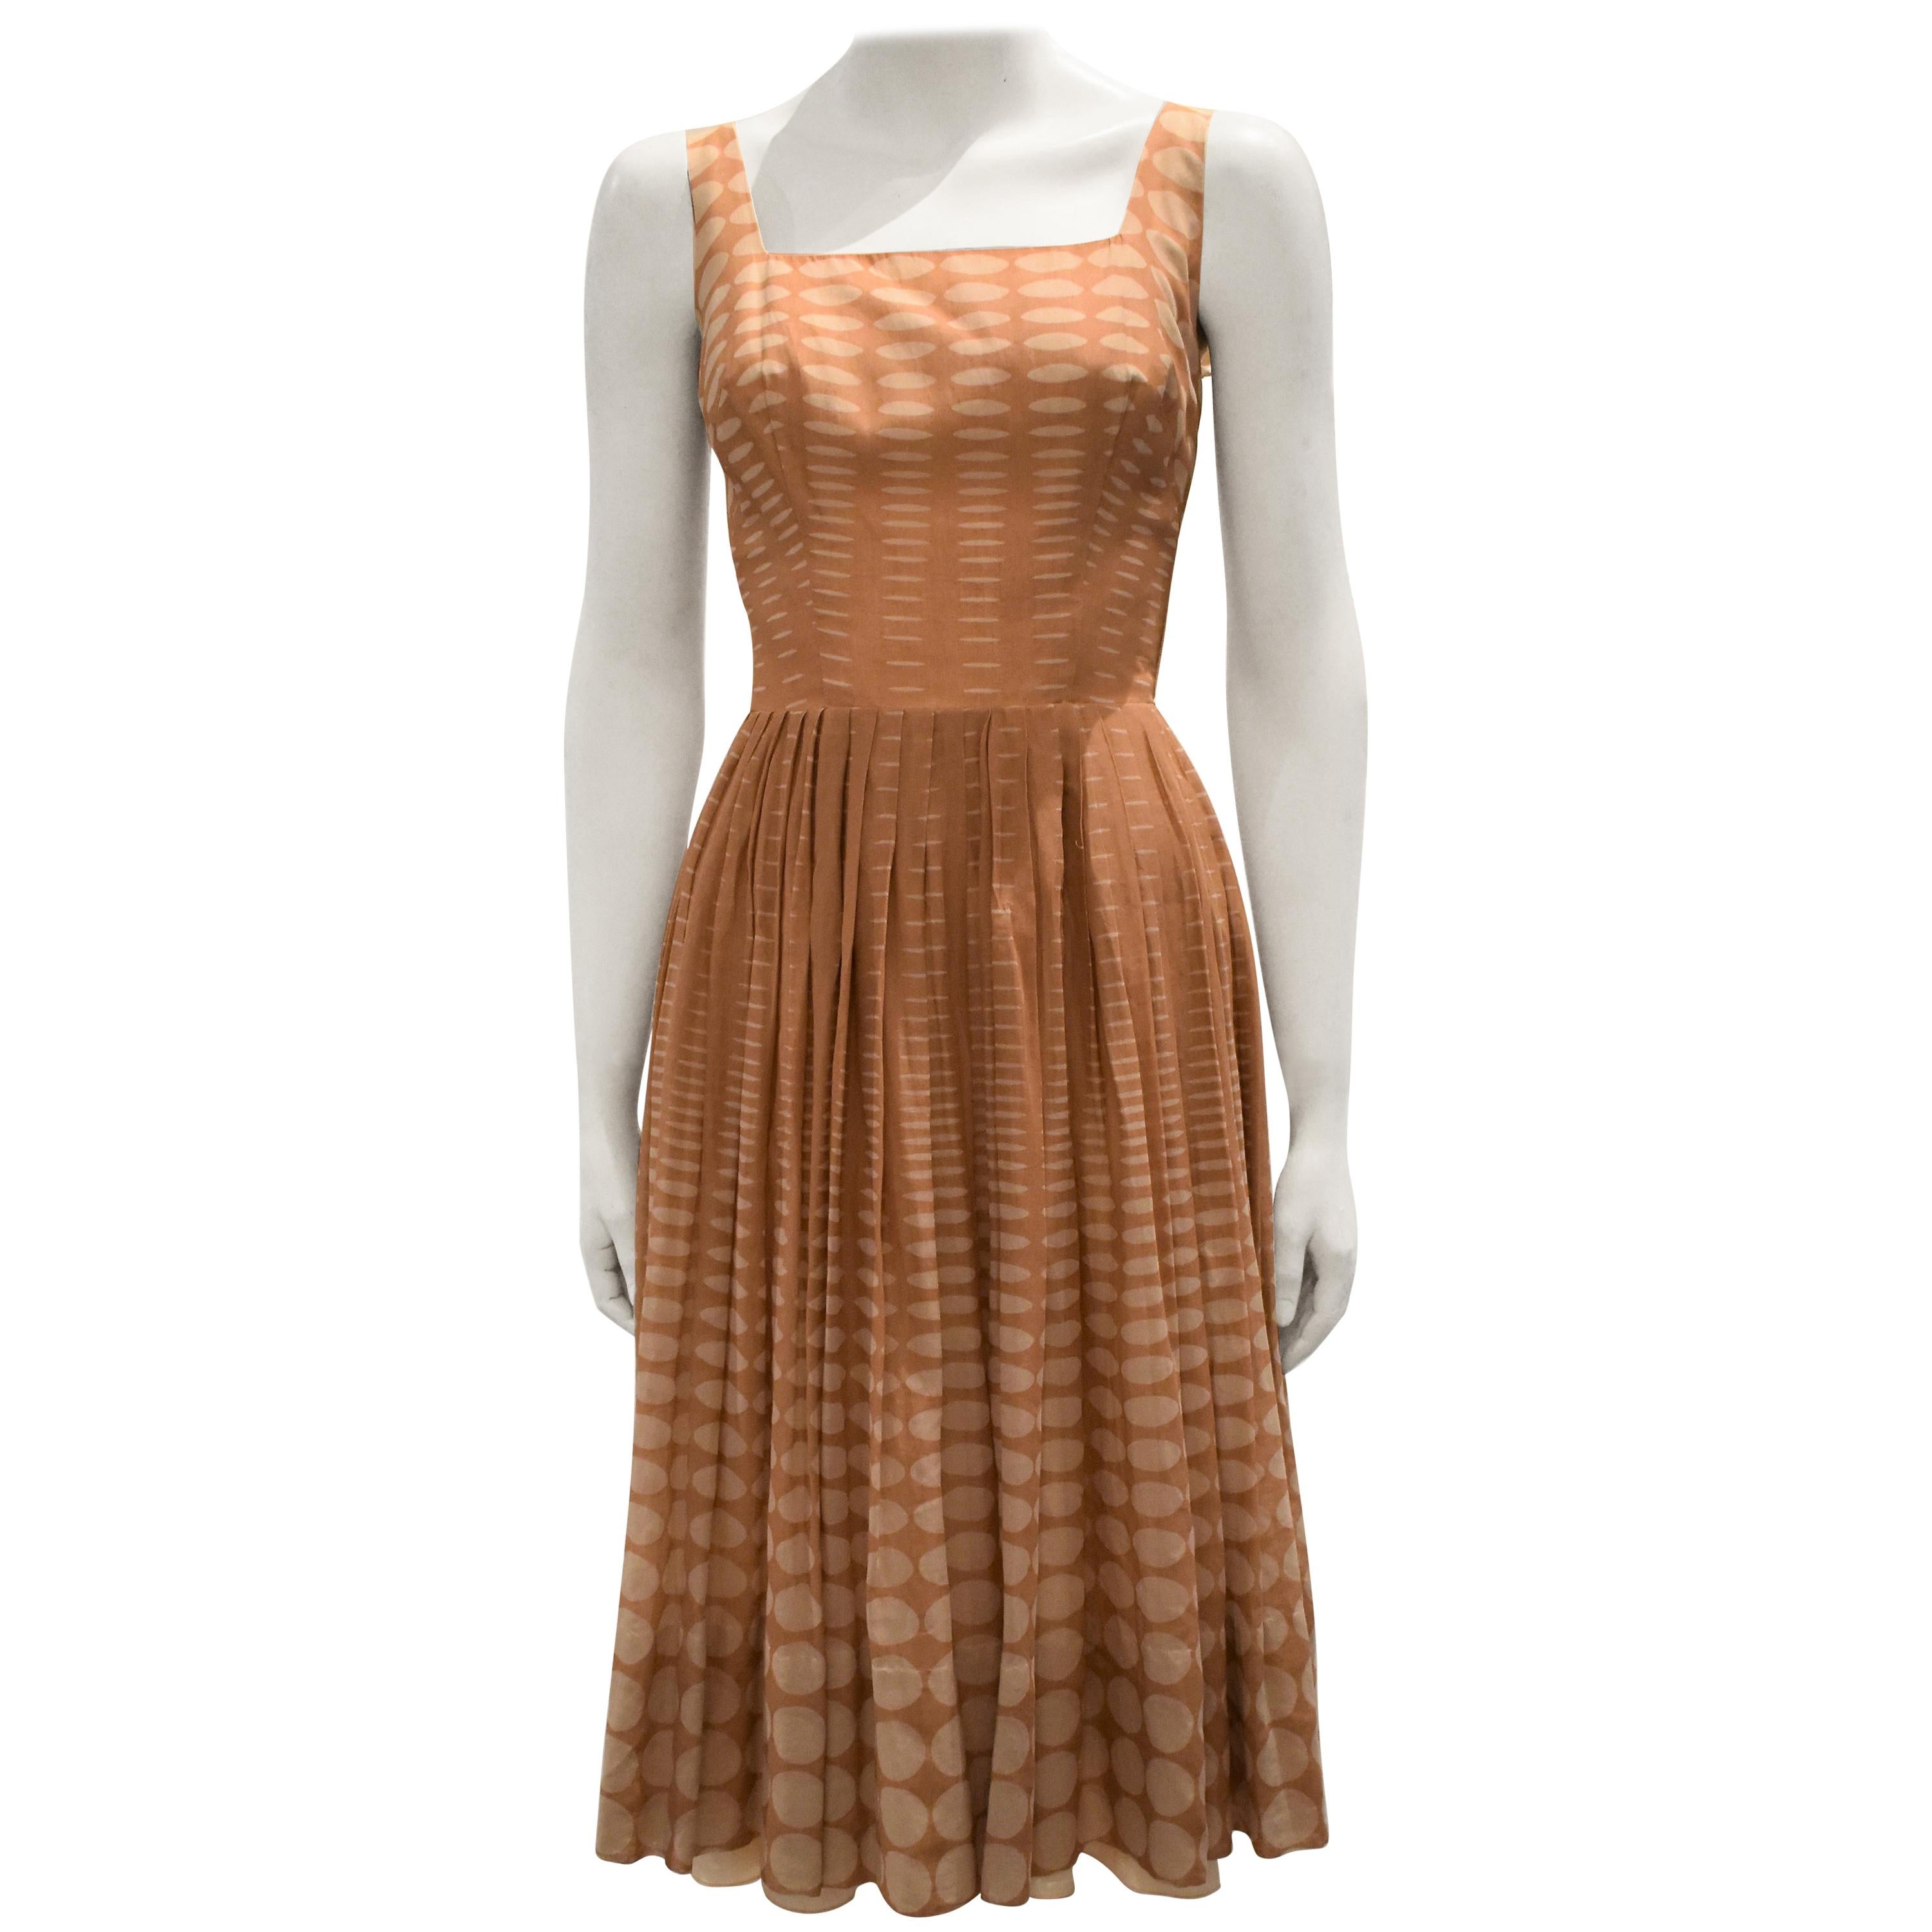 Vintage 1950s Batiste Handmade Dress with a Flowy Pleated Skirt For Sale